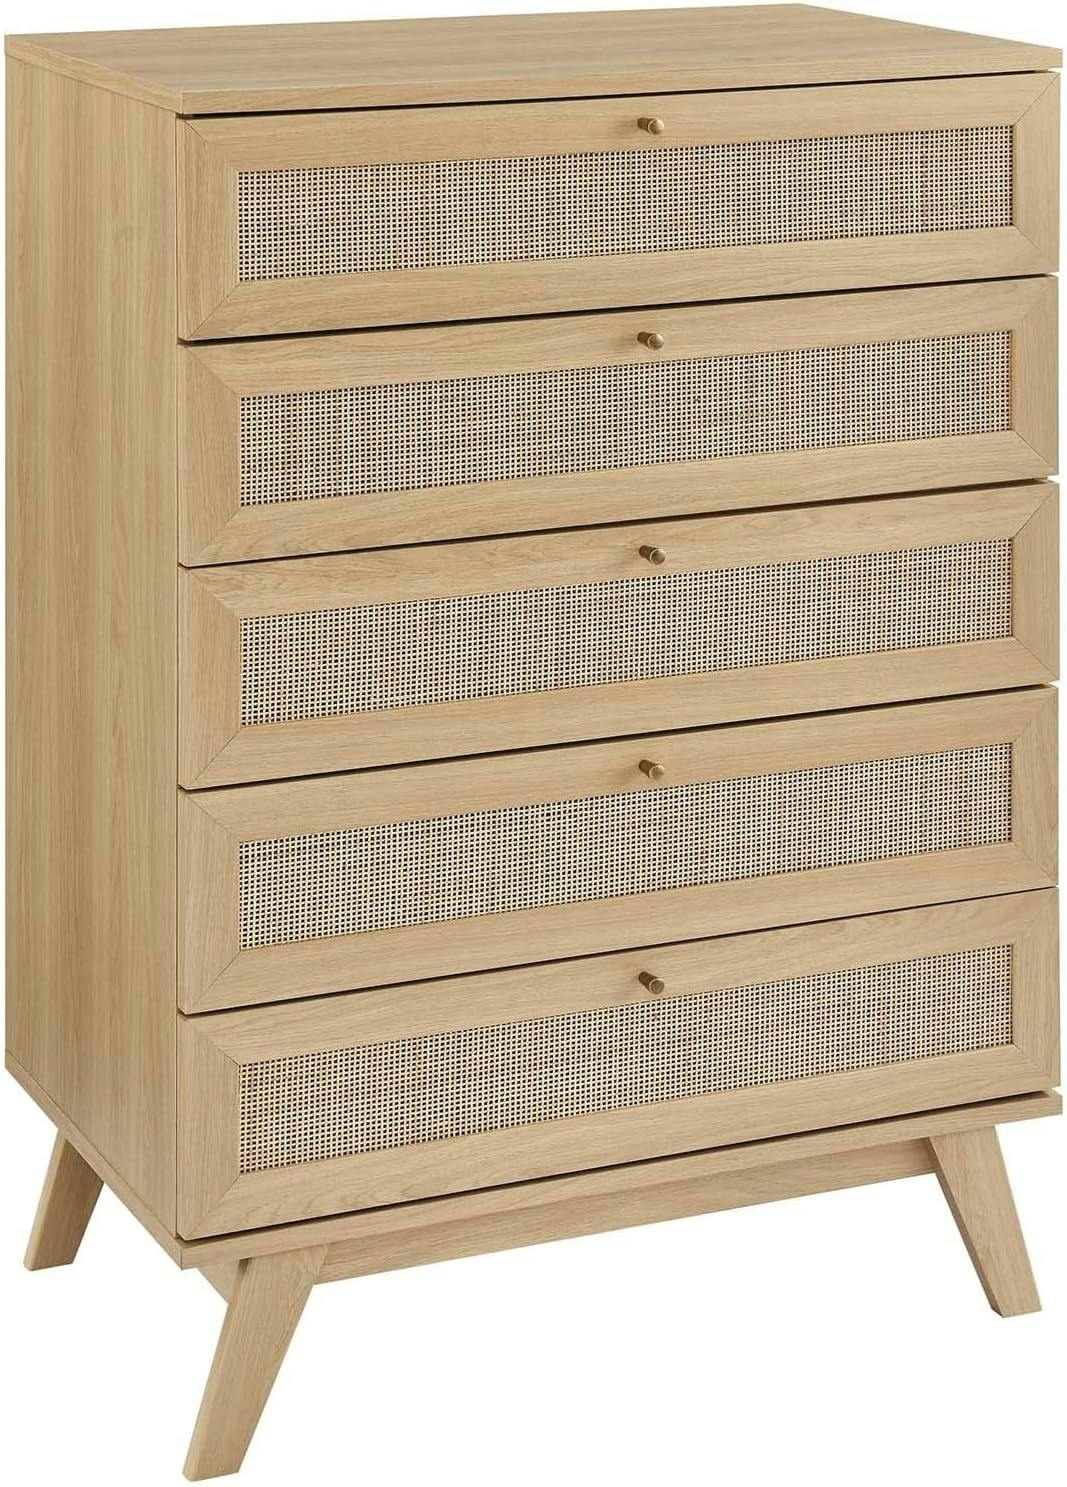 Soma Oak 5-Drawer Chest with Rattan Weave and Splayed Legs